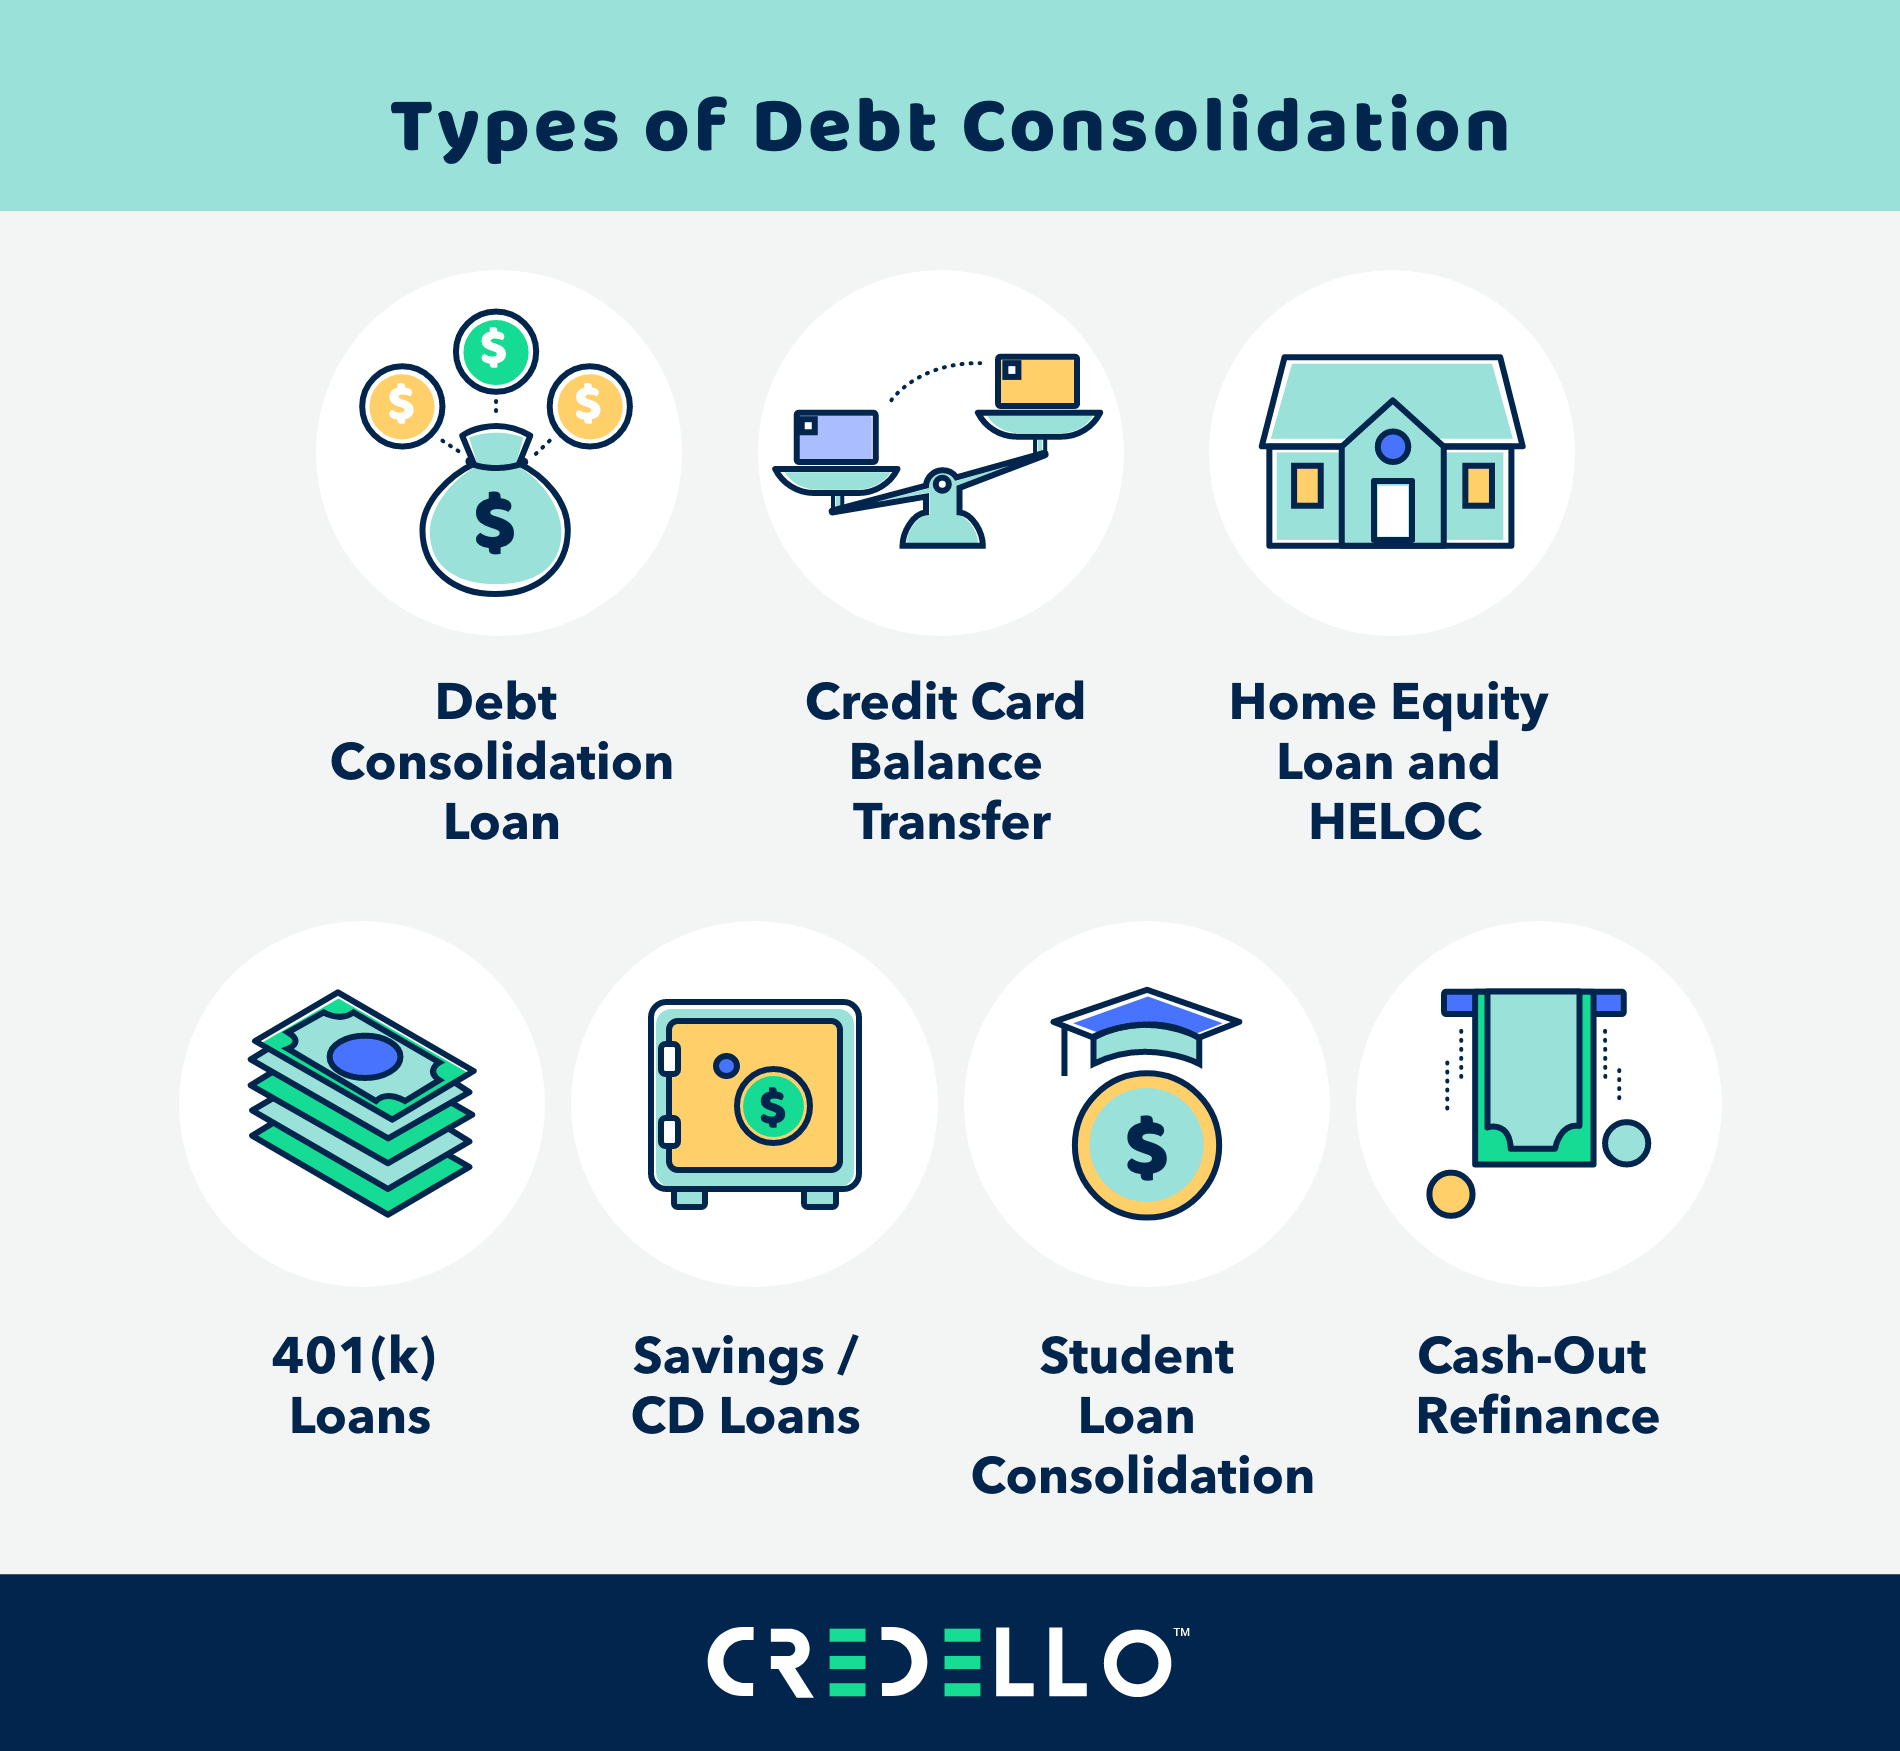 Types of debt consolidation